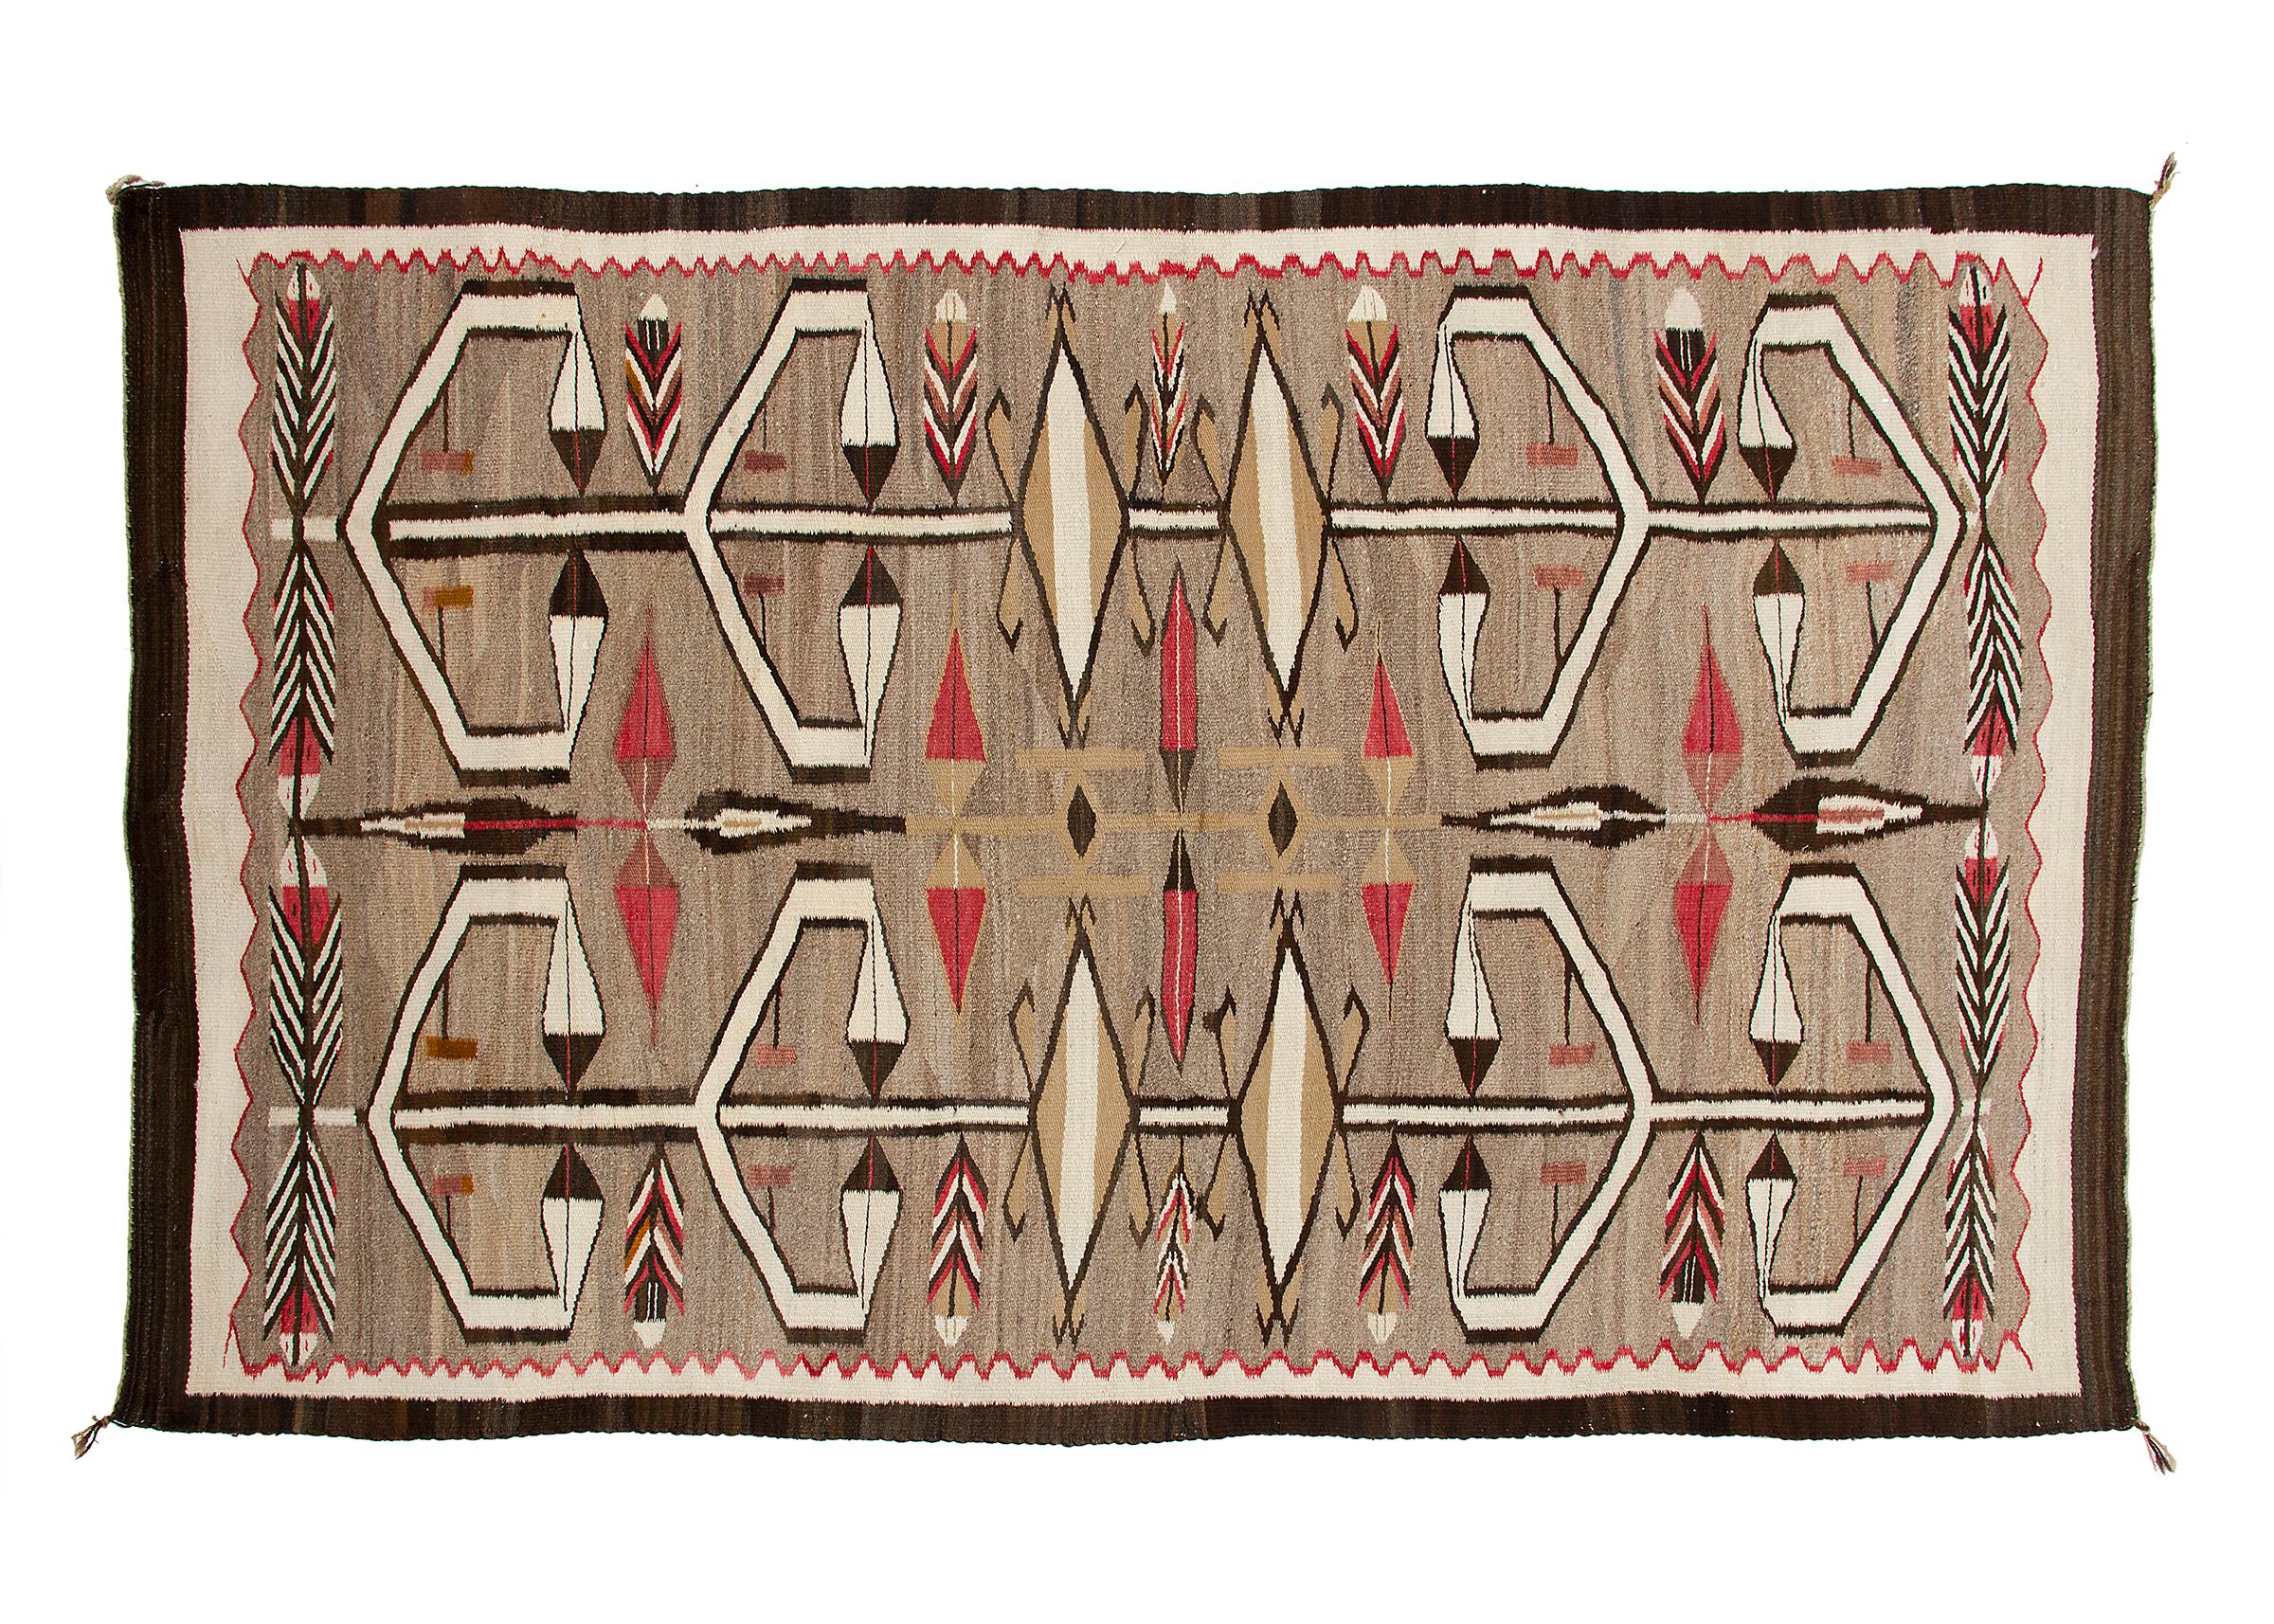 Navajo rug vintage circa 1930s from the Crystal Trading Post (J.B. Moore) at Crystal, New Mexico. Pictorial elements include feathers and arrows. Woven of native hand-spun wool in natural fleece colors of brown, gray, ivory/white, camel, brown/black